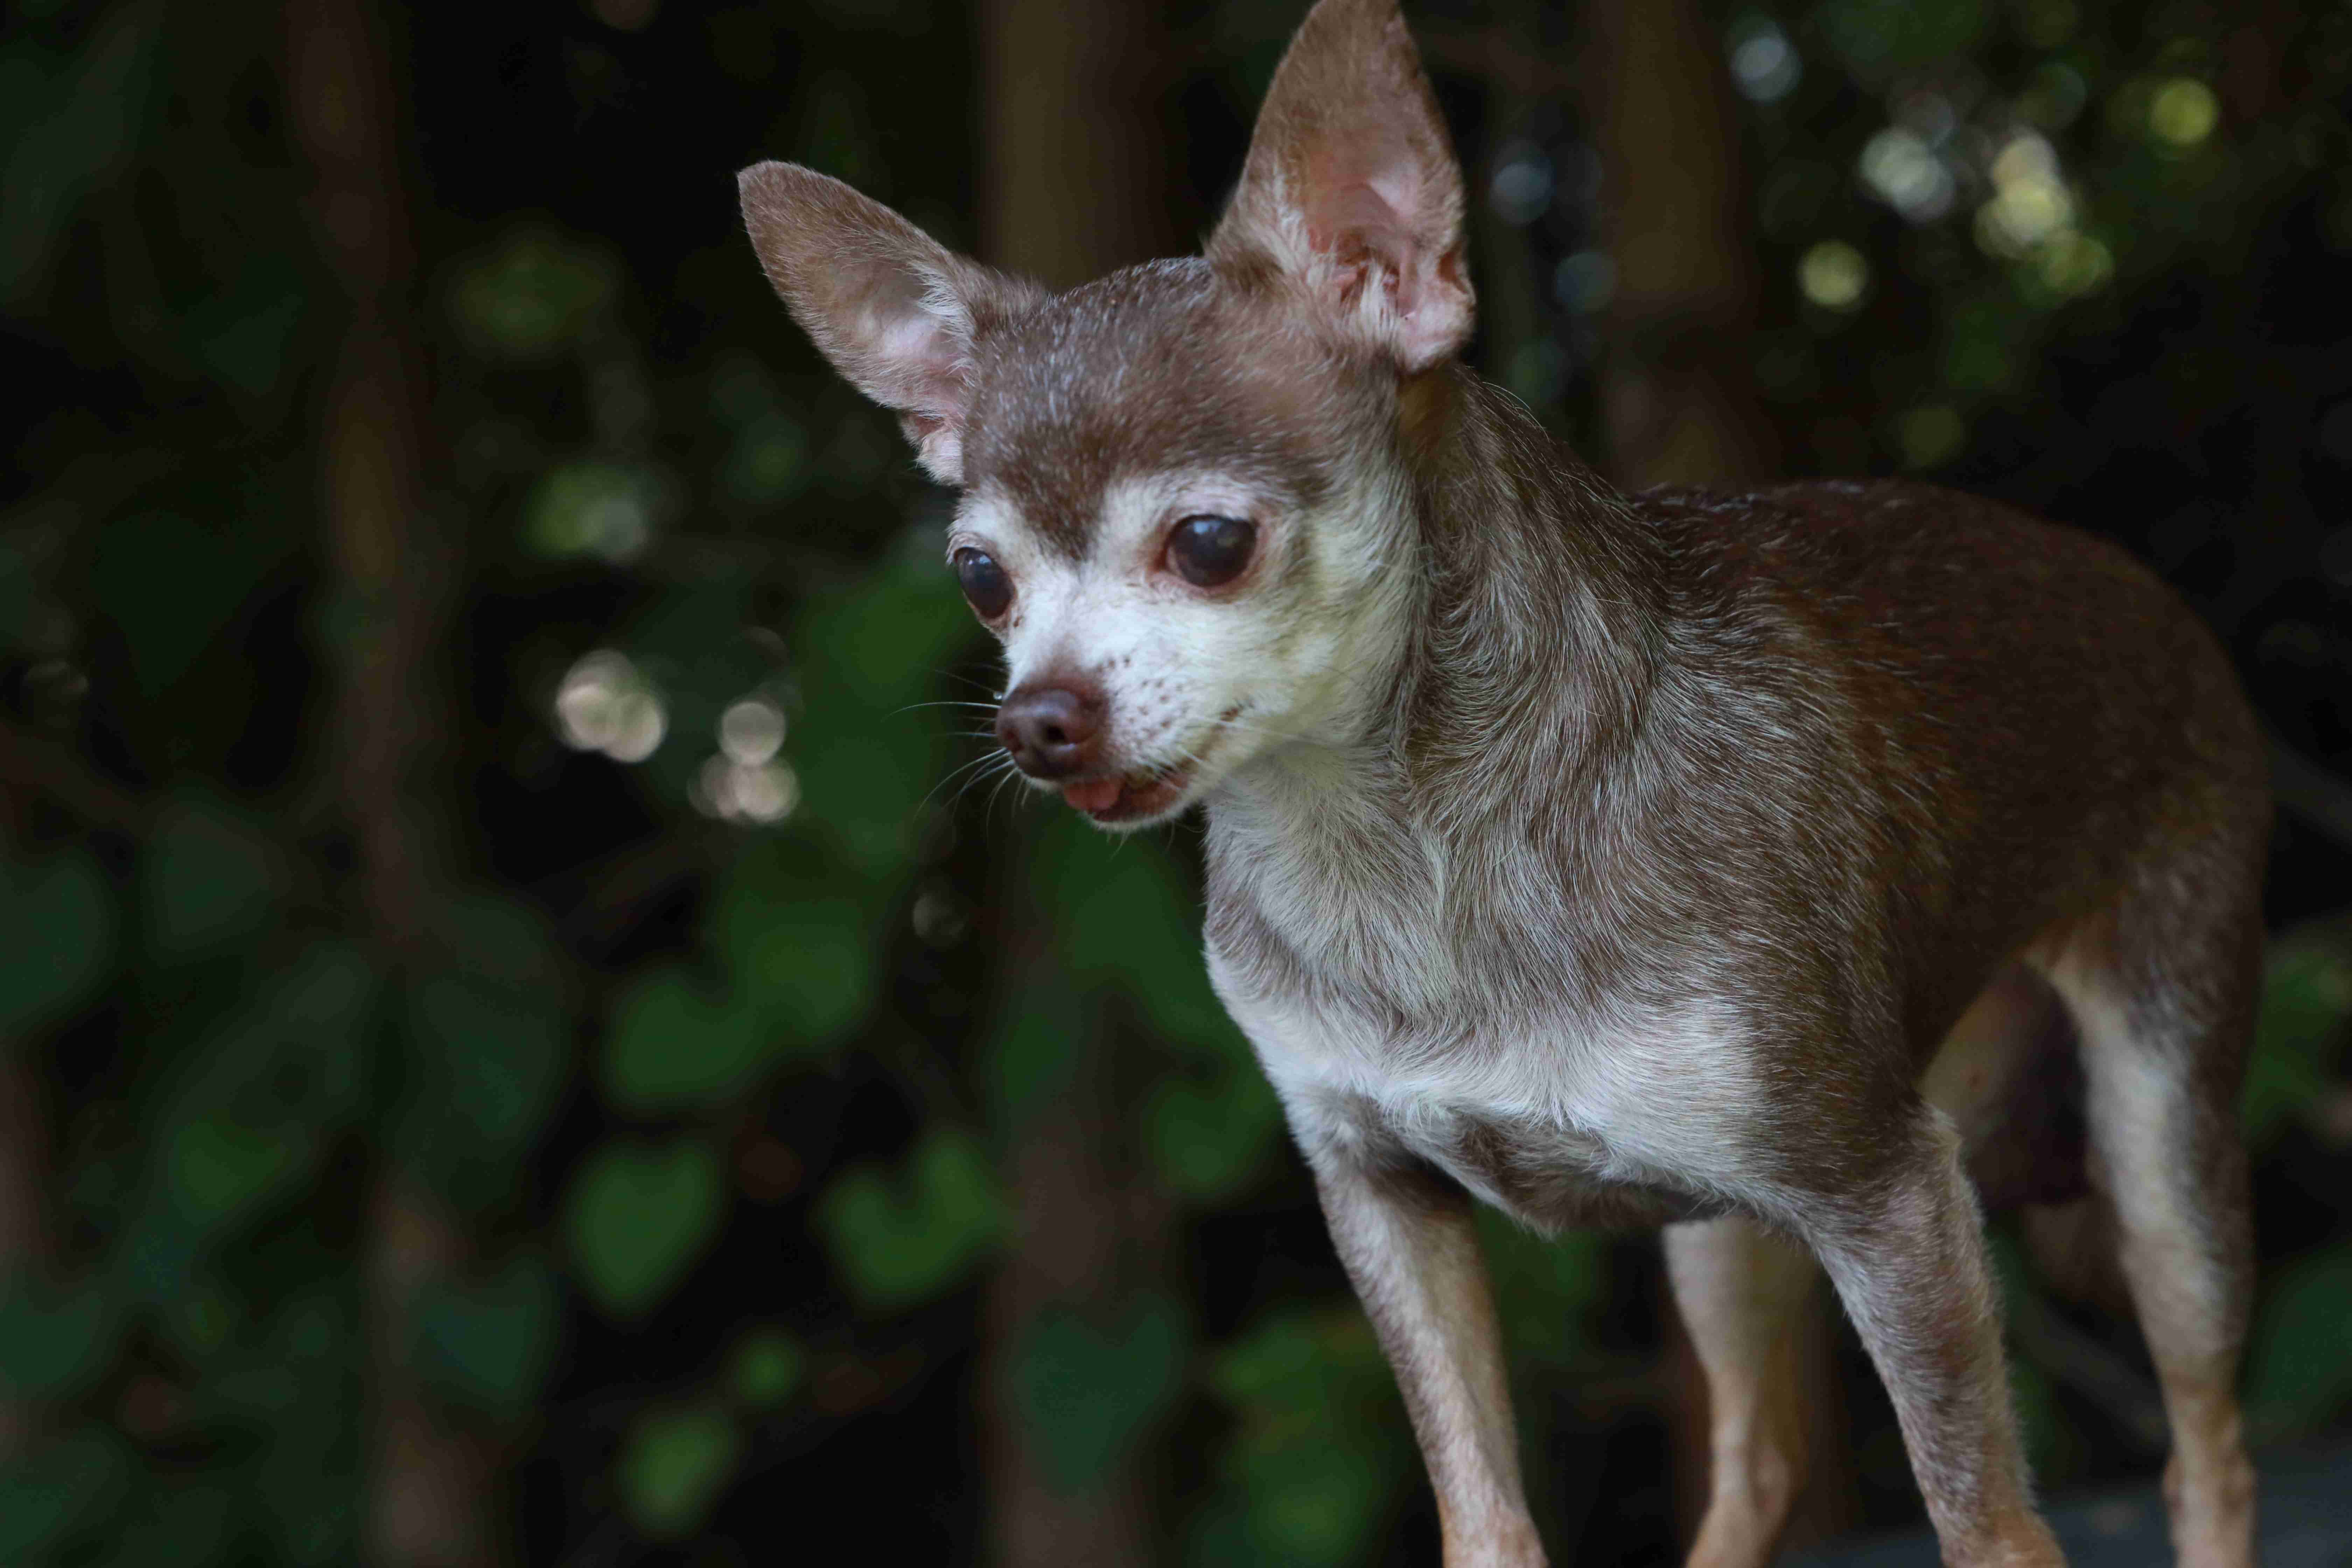 How can you socialize a Chihuahua to prevent aggression towards other dogs?